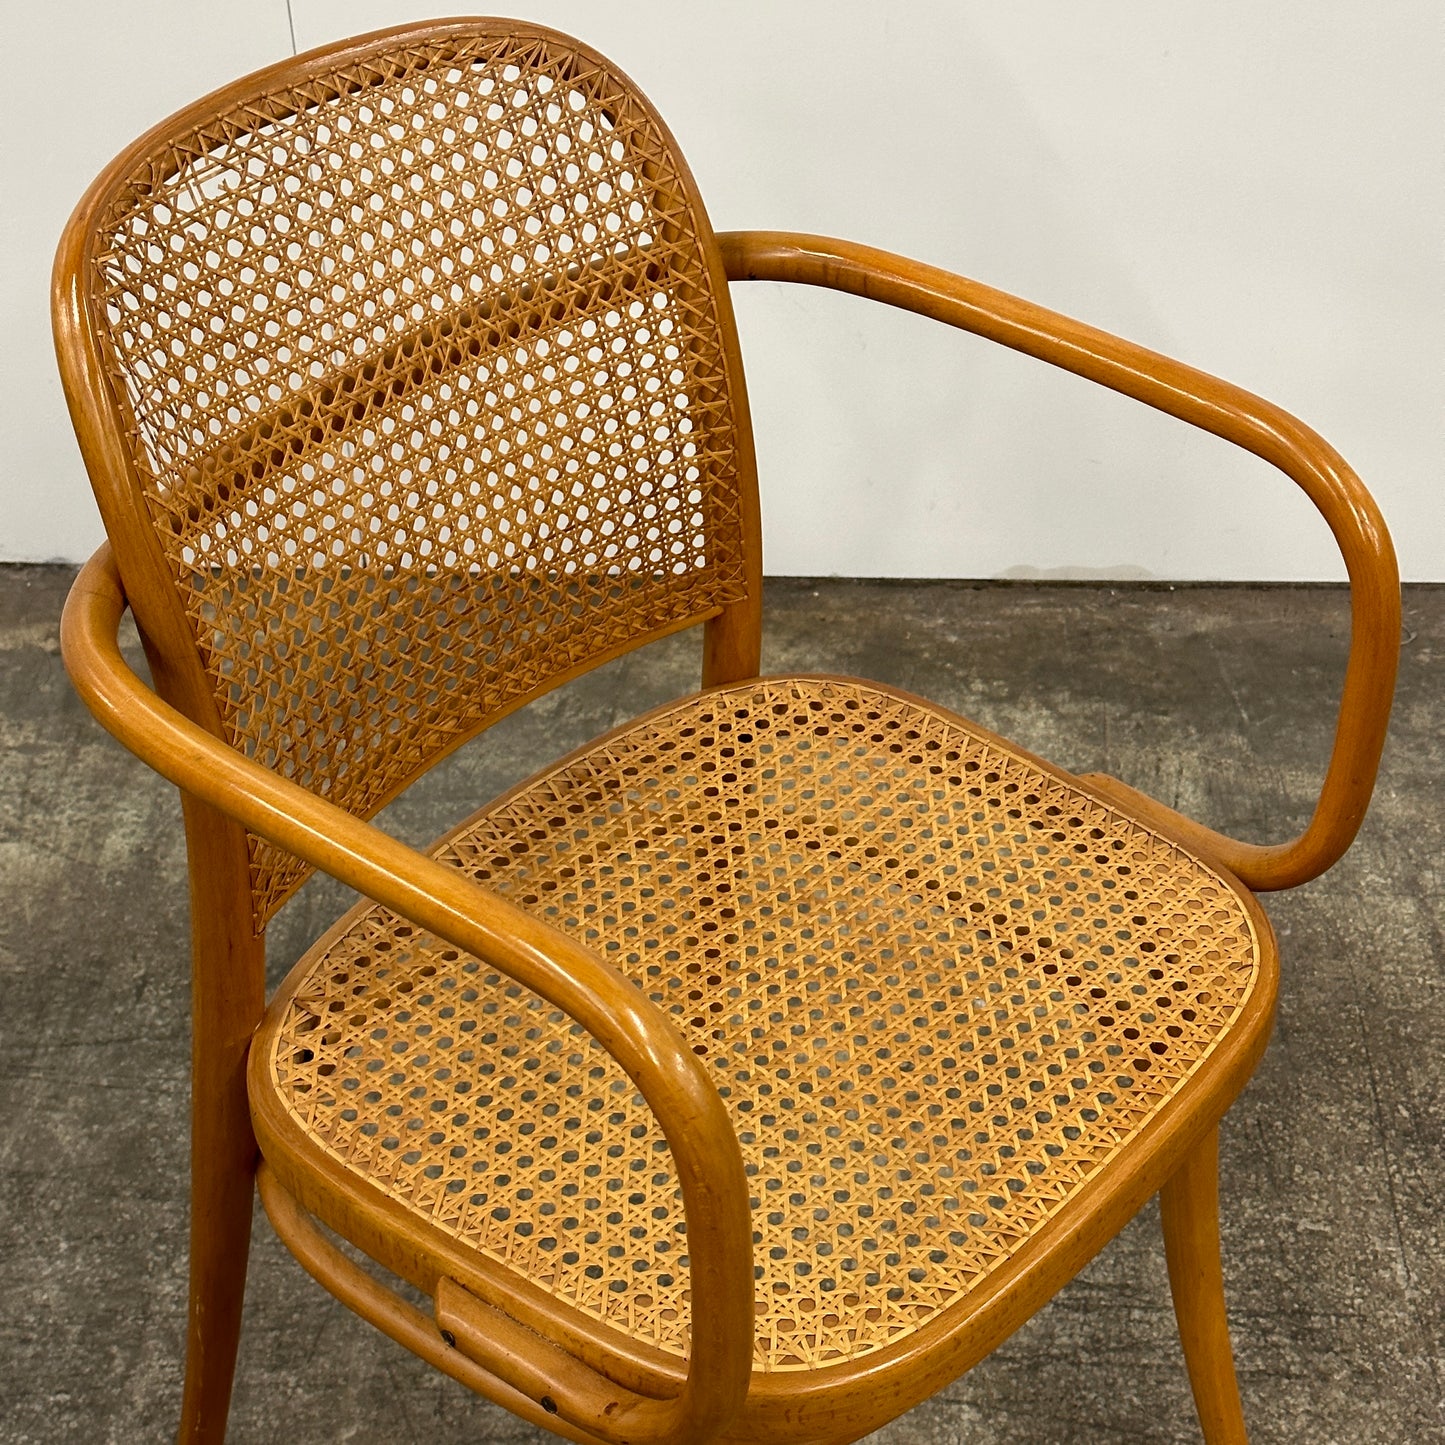 No.811 “Prague” Chairs by Josef Hoffman for Thonet